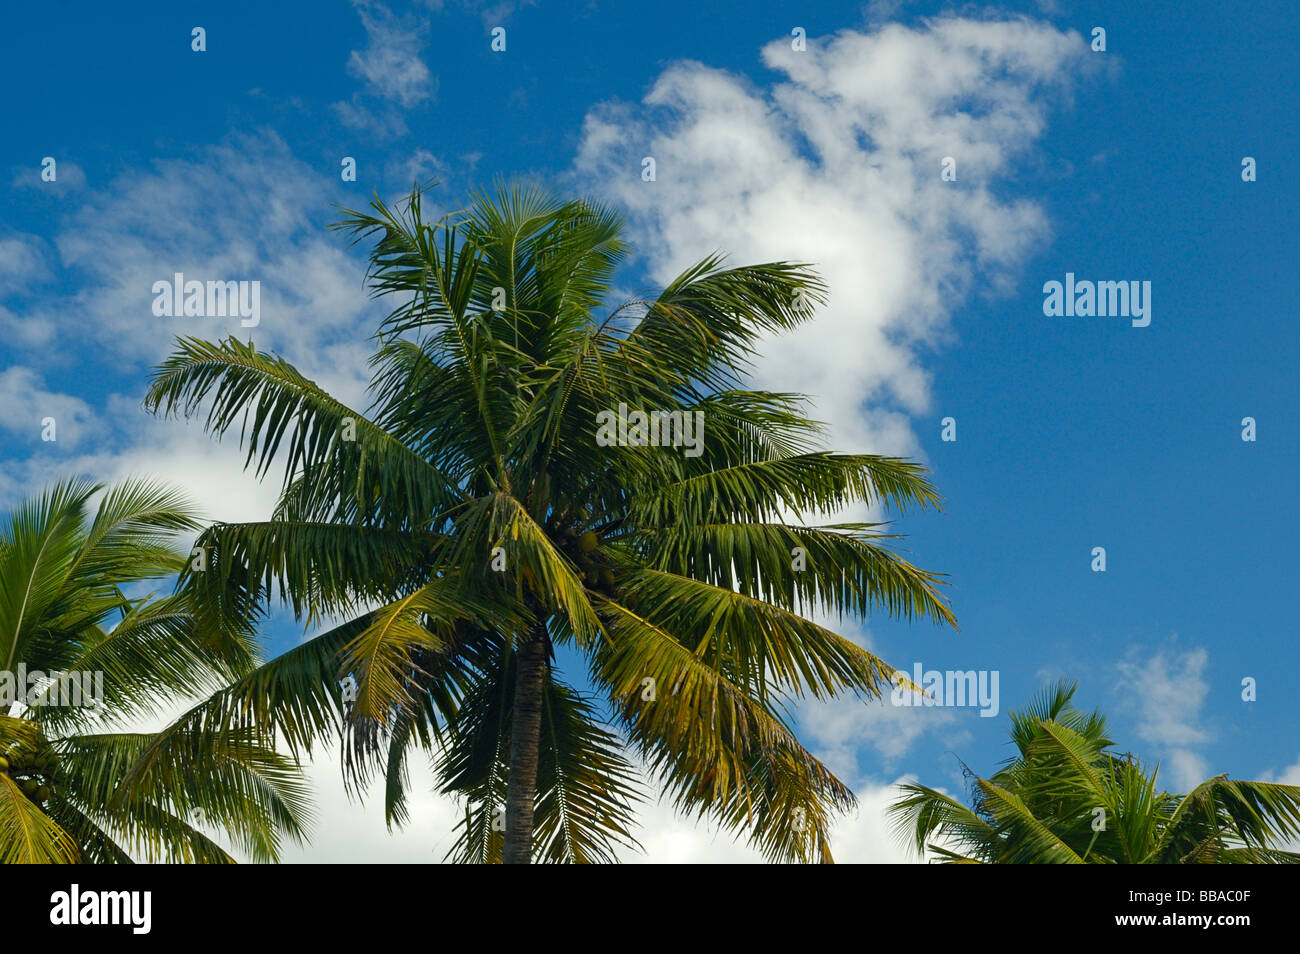 India, Kerala, Backwaters. Palm trees, blue sky and white clouds in the Backwaters. No releases available. Stock Photo